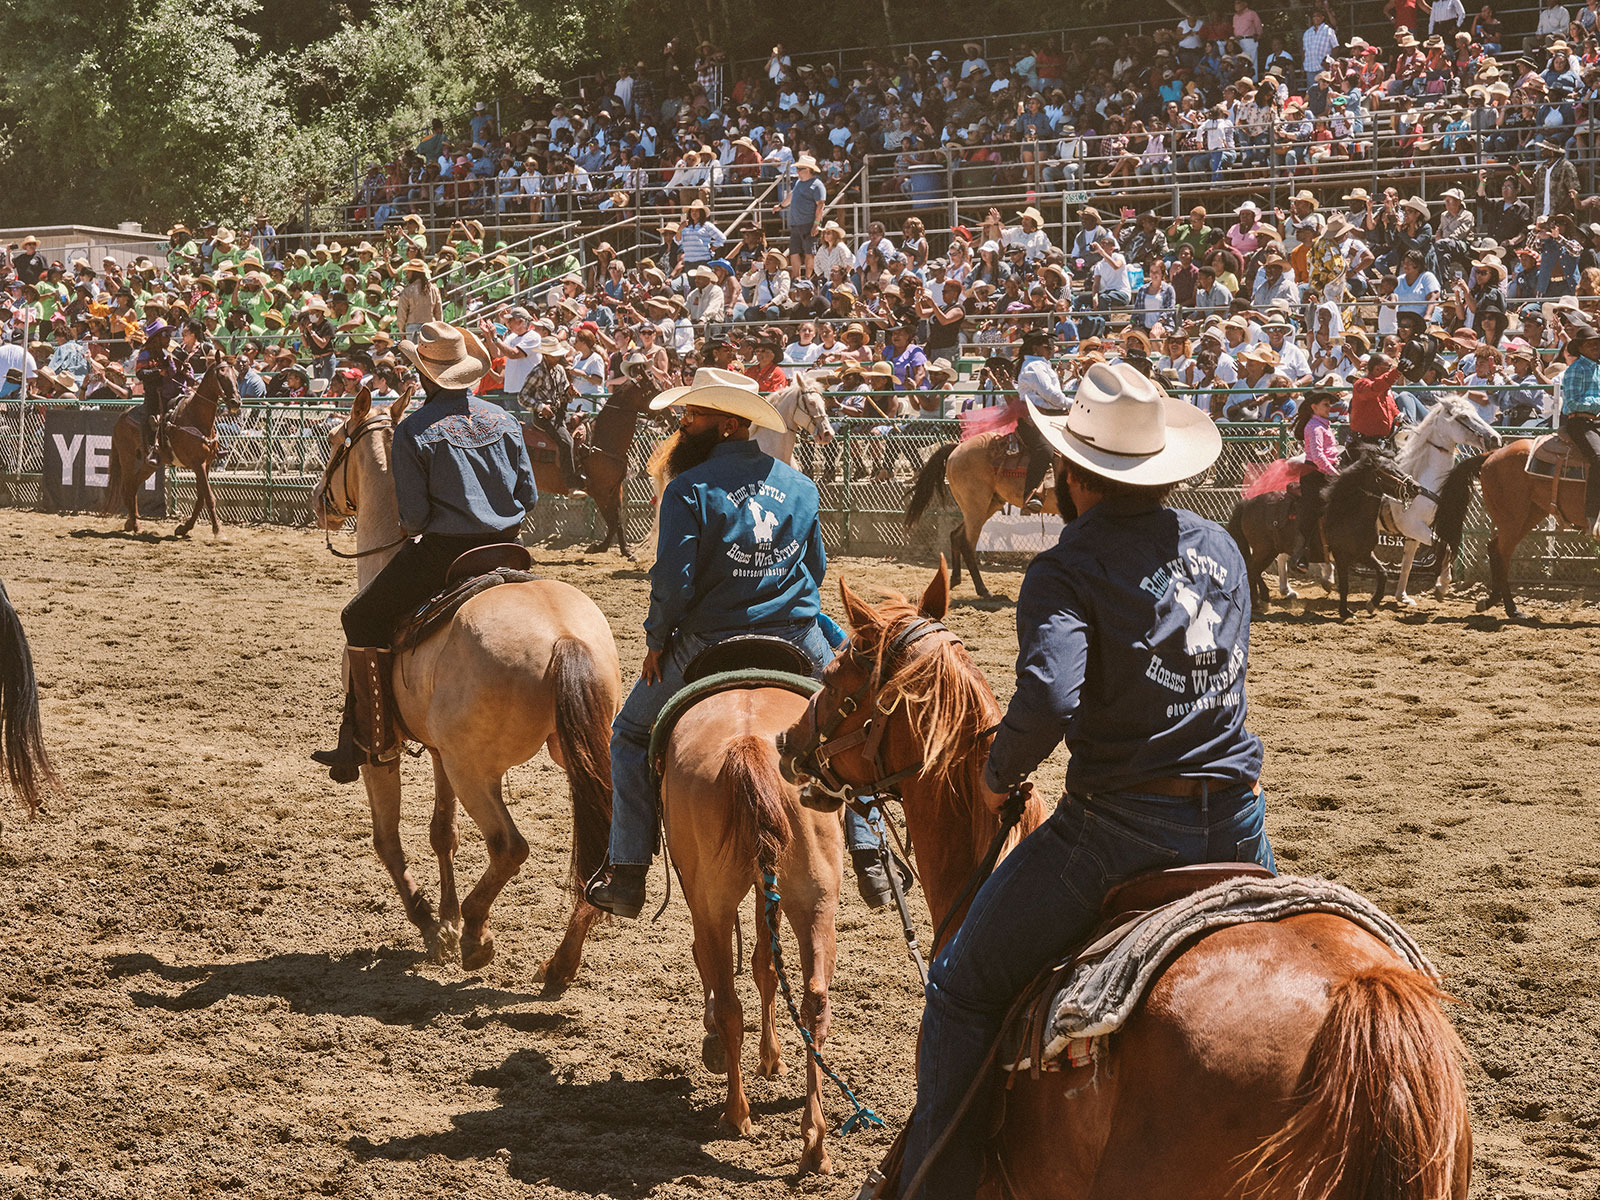 Riders in the rodeo arena